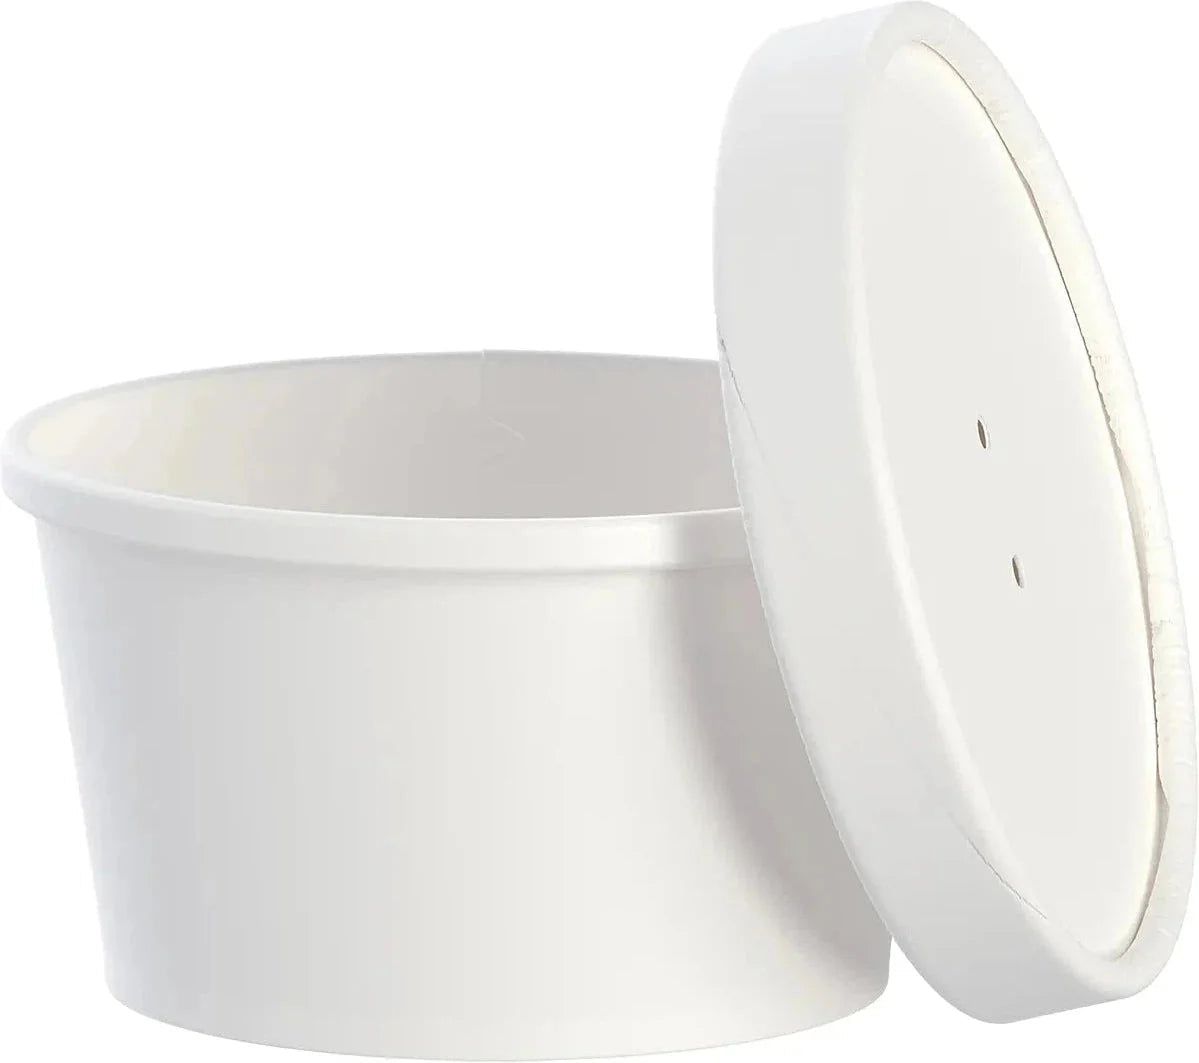 Dart Container - 8 Oz White Squat DSP Paper Food Container and Lid Combo Pack, 250/Cs - KHSB8A-2050